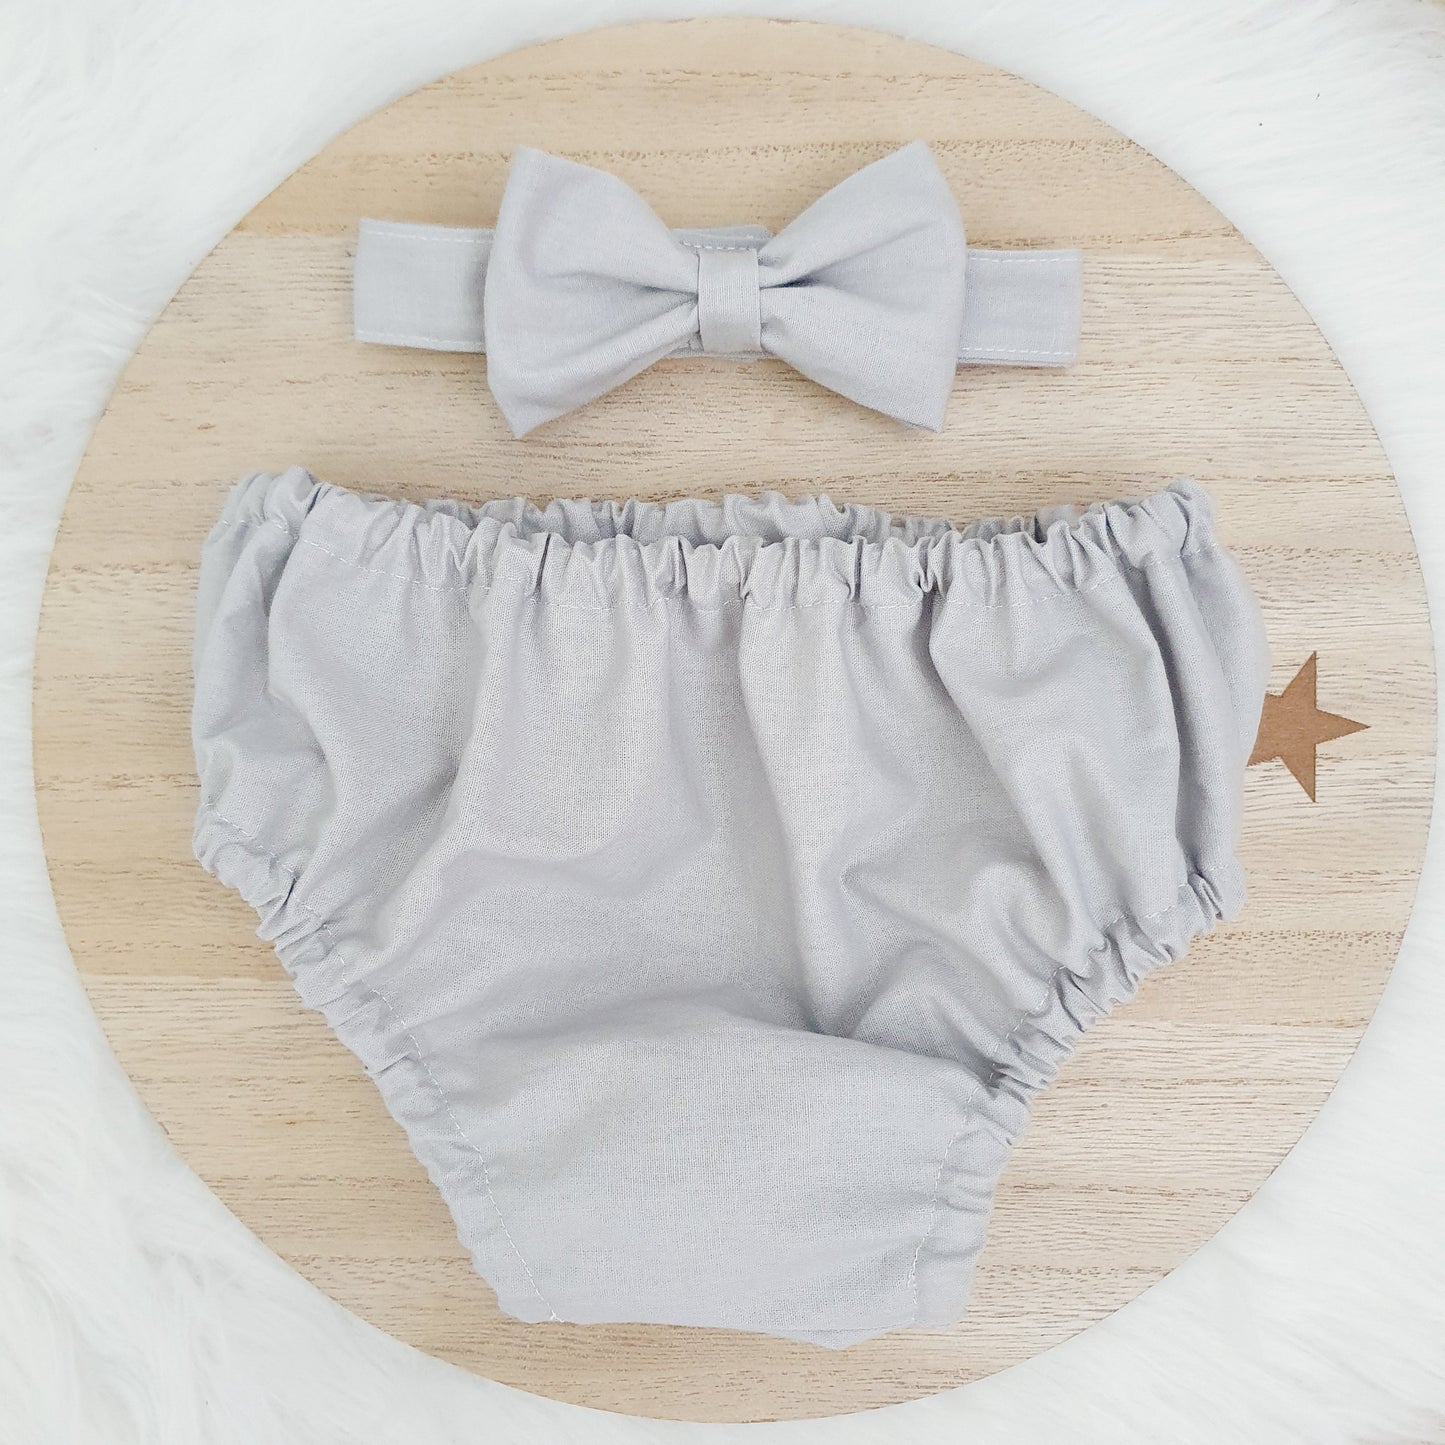 LIGHT GREY Boys Cake Smash Outfit, 1st Birthday, First Birthday Outfit, Size 0, 2 Piece Set